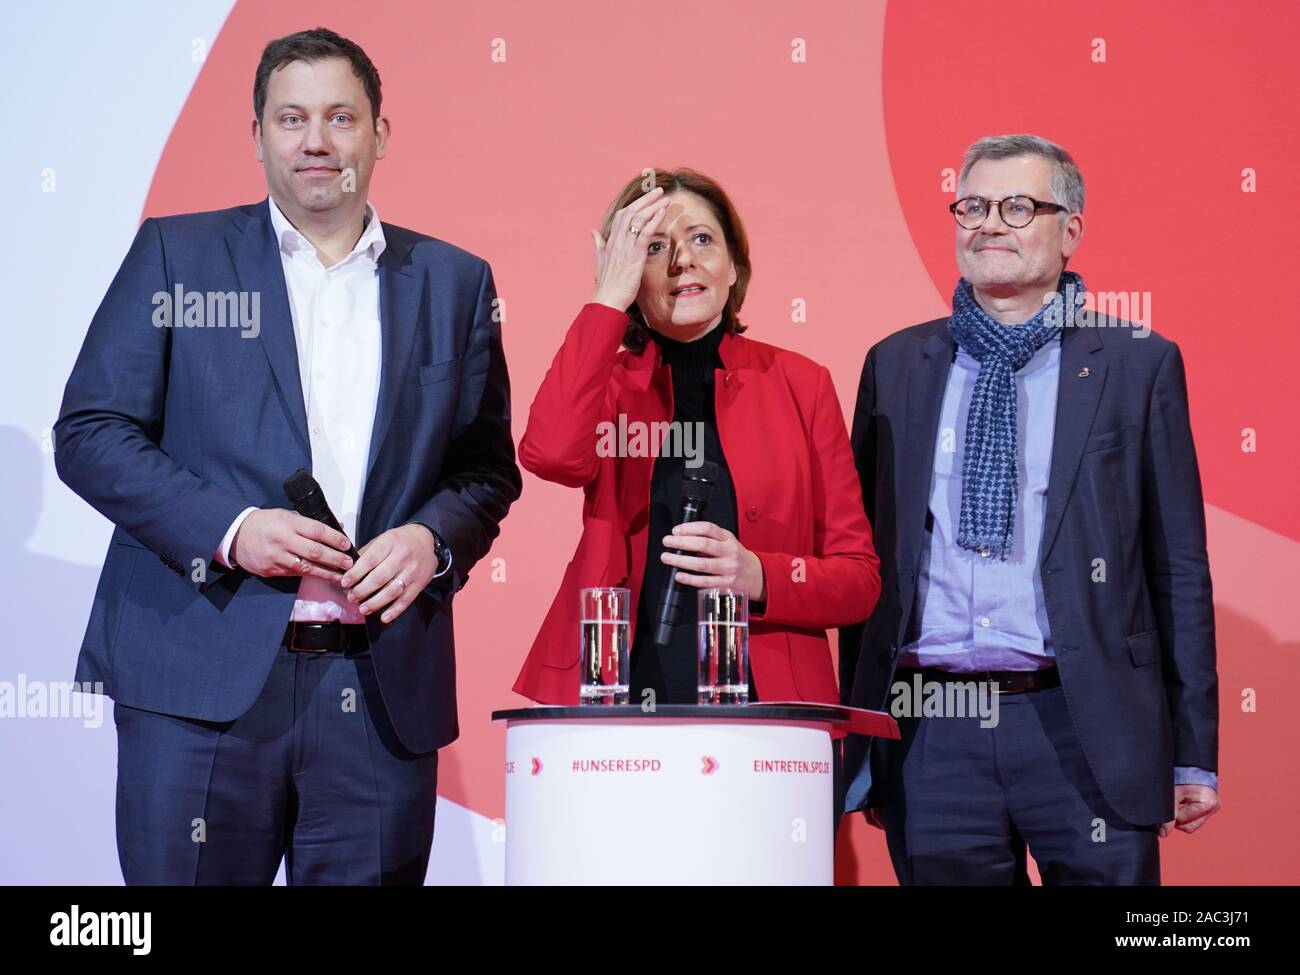 Berlin, Germany. 30th Nov, 2019. Lars Klingbeil (l-r), Secretary General of the SPD, Malu Dreyer, provisional SPD Chairwoman, and Dietmar Nietan, SPD Treasurer, are on the podium at the announcement of the result of the vote on the SPD chairmanship in the Willy Brandt House. Walter-Borjans and Esken have won the vote. The new leadership will be confirmed at the party conference on December 6. Credit: Kay Nietfeld/dpa/Alamy Live News Stock Photo